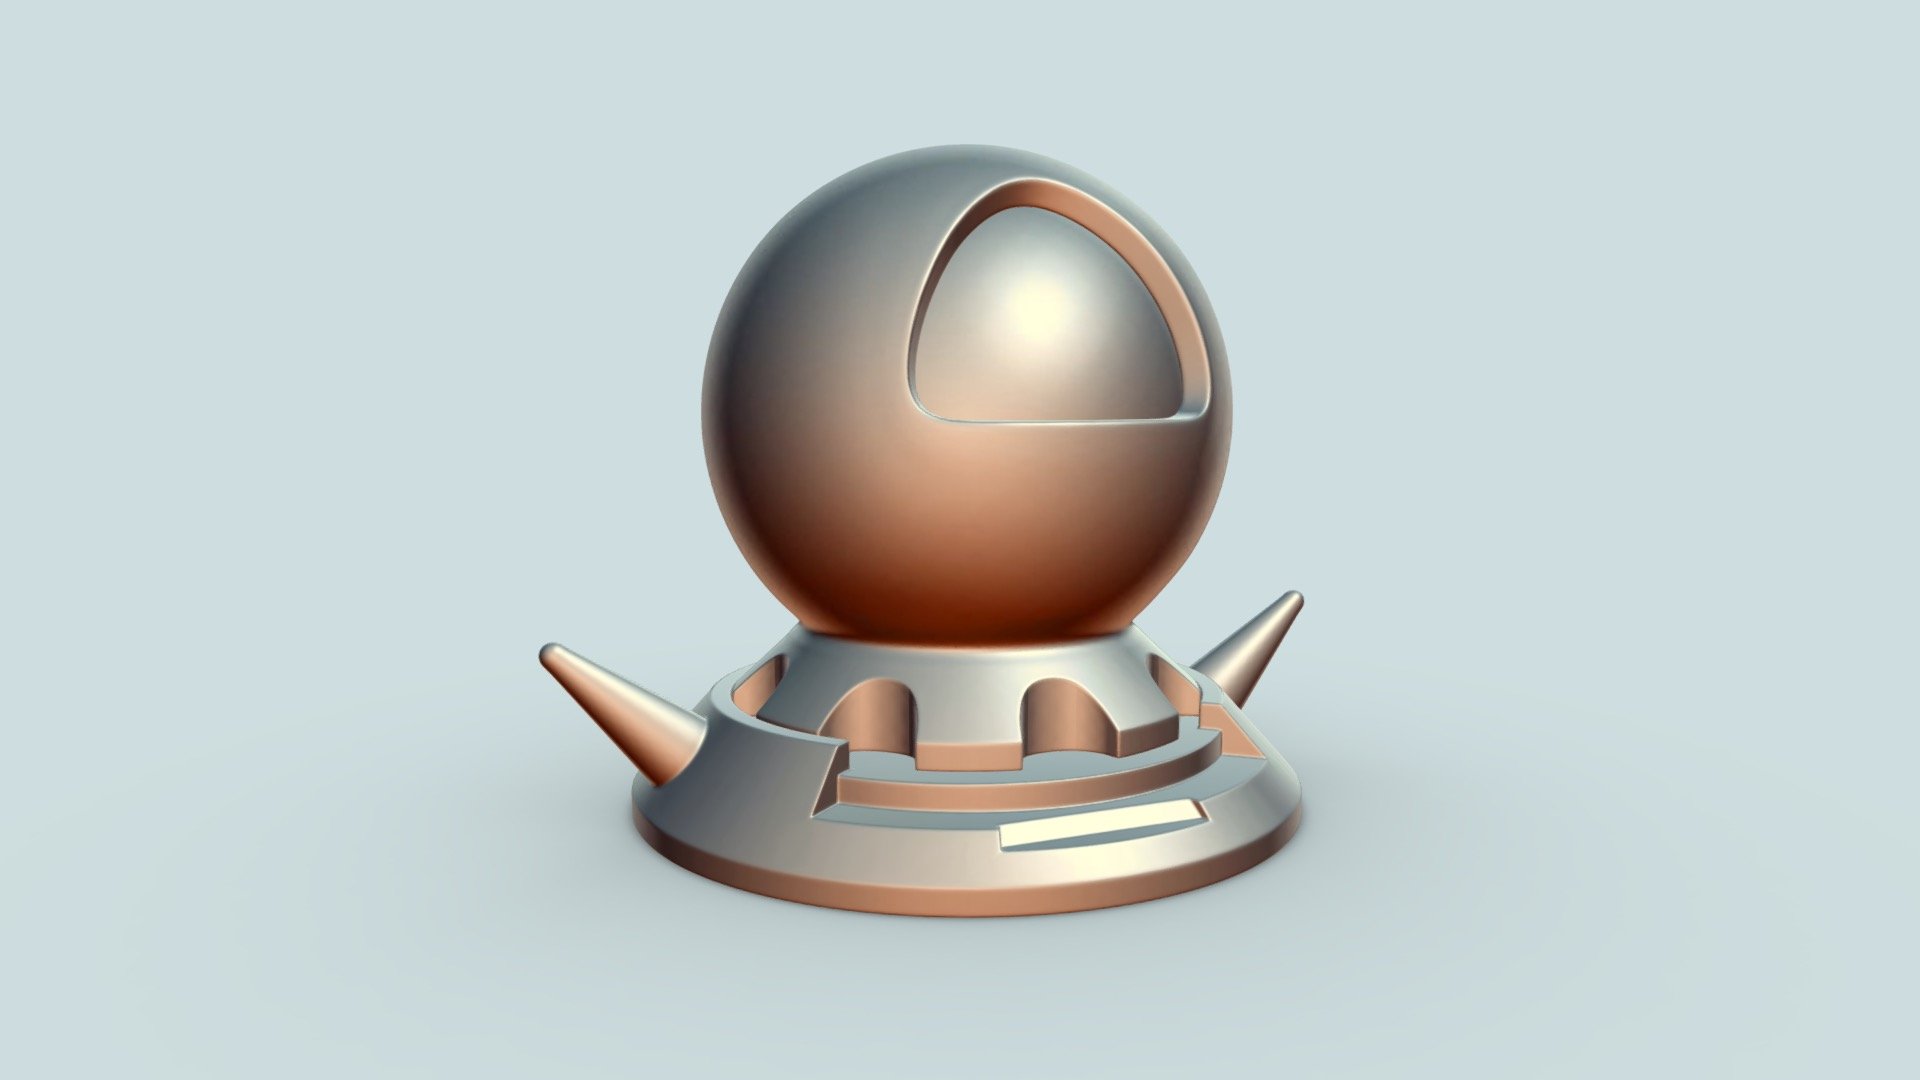 shader-ball-download-free-3d-model-by-athirn-68d28c0-sketchfab